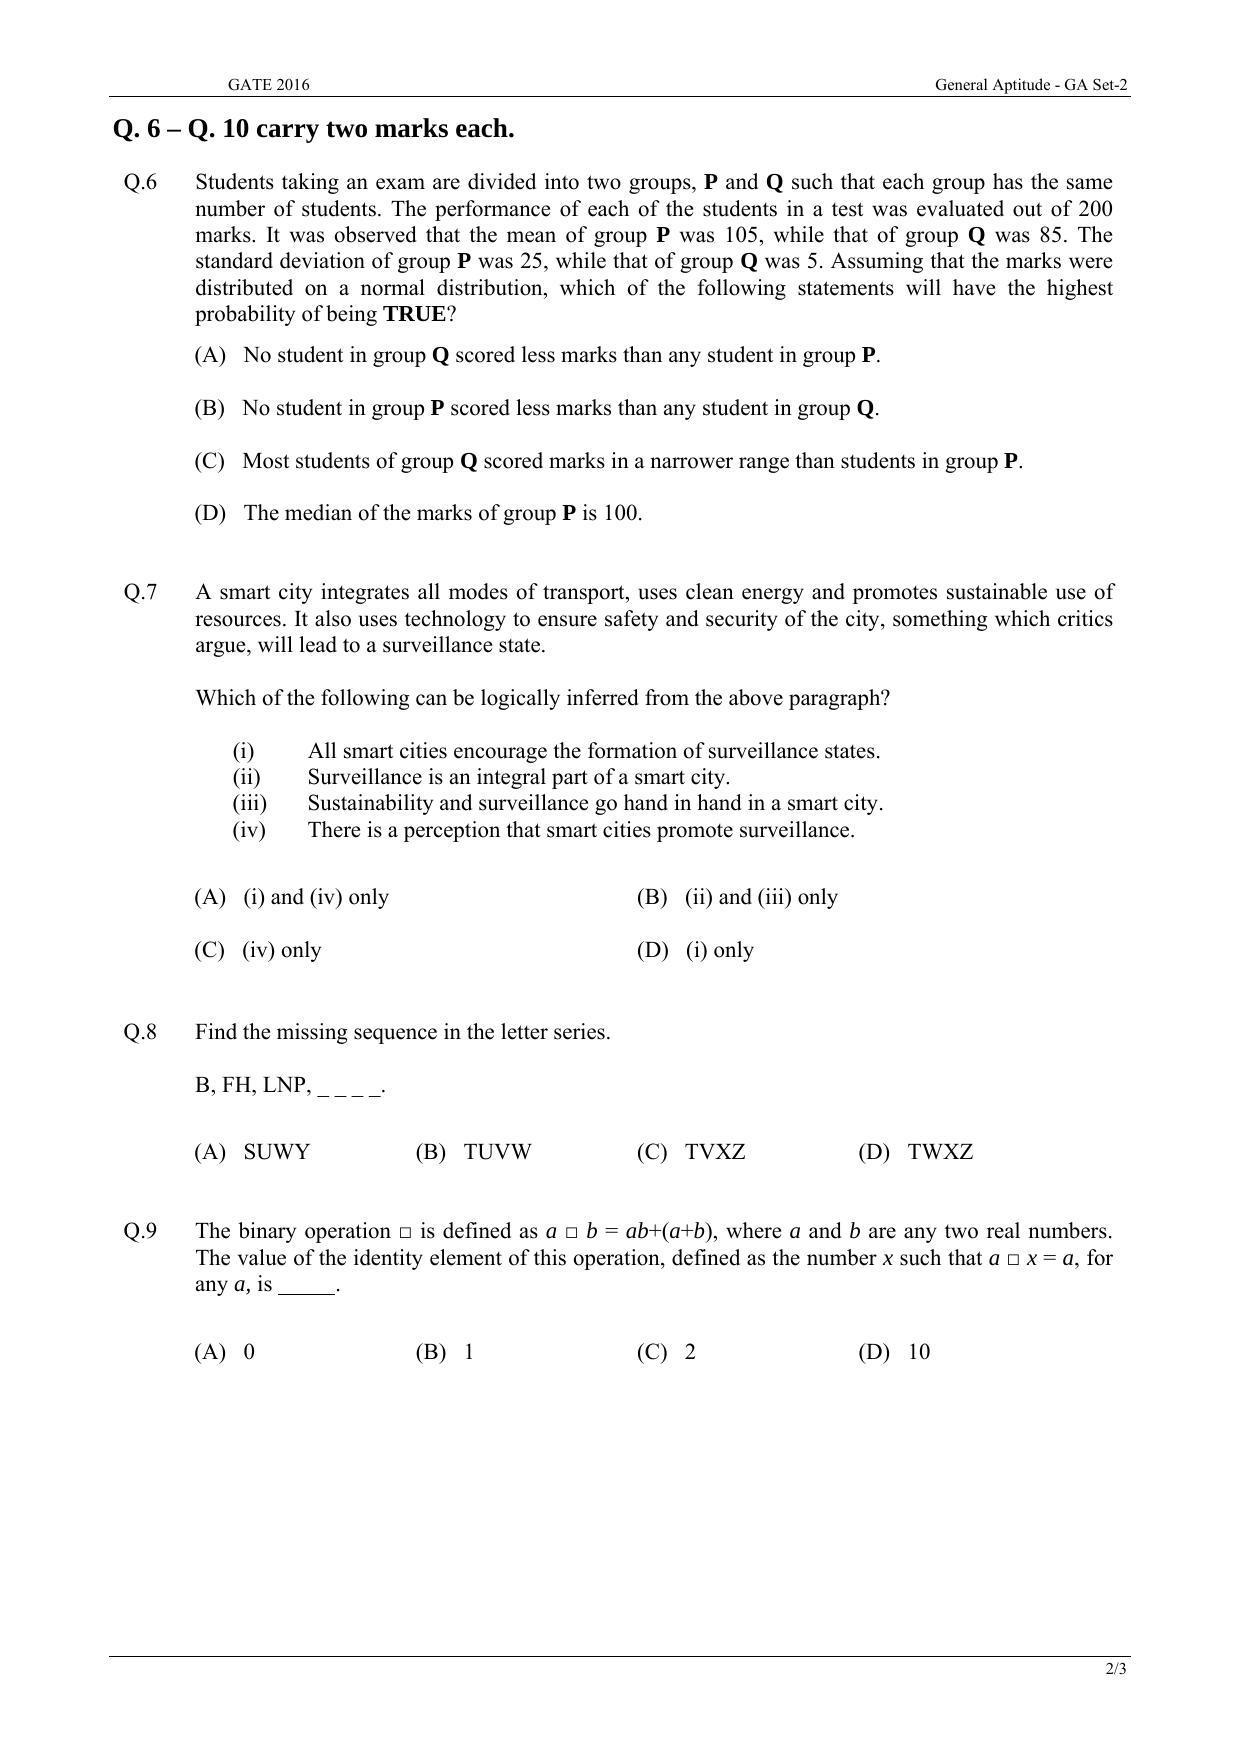 GATE 2016 Physics (PH) Question Paper with Answer Key - Page 2